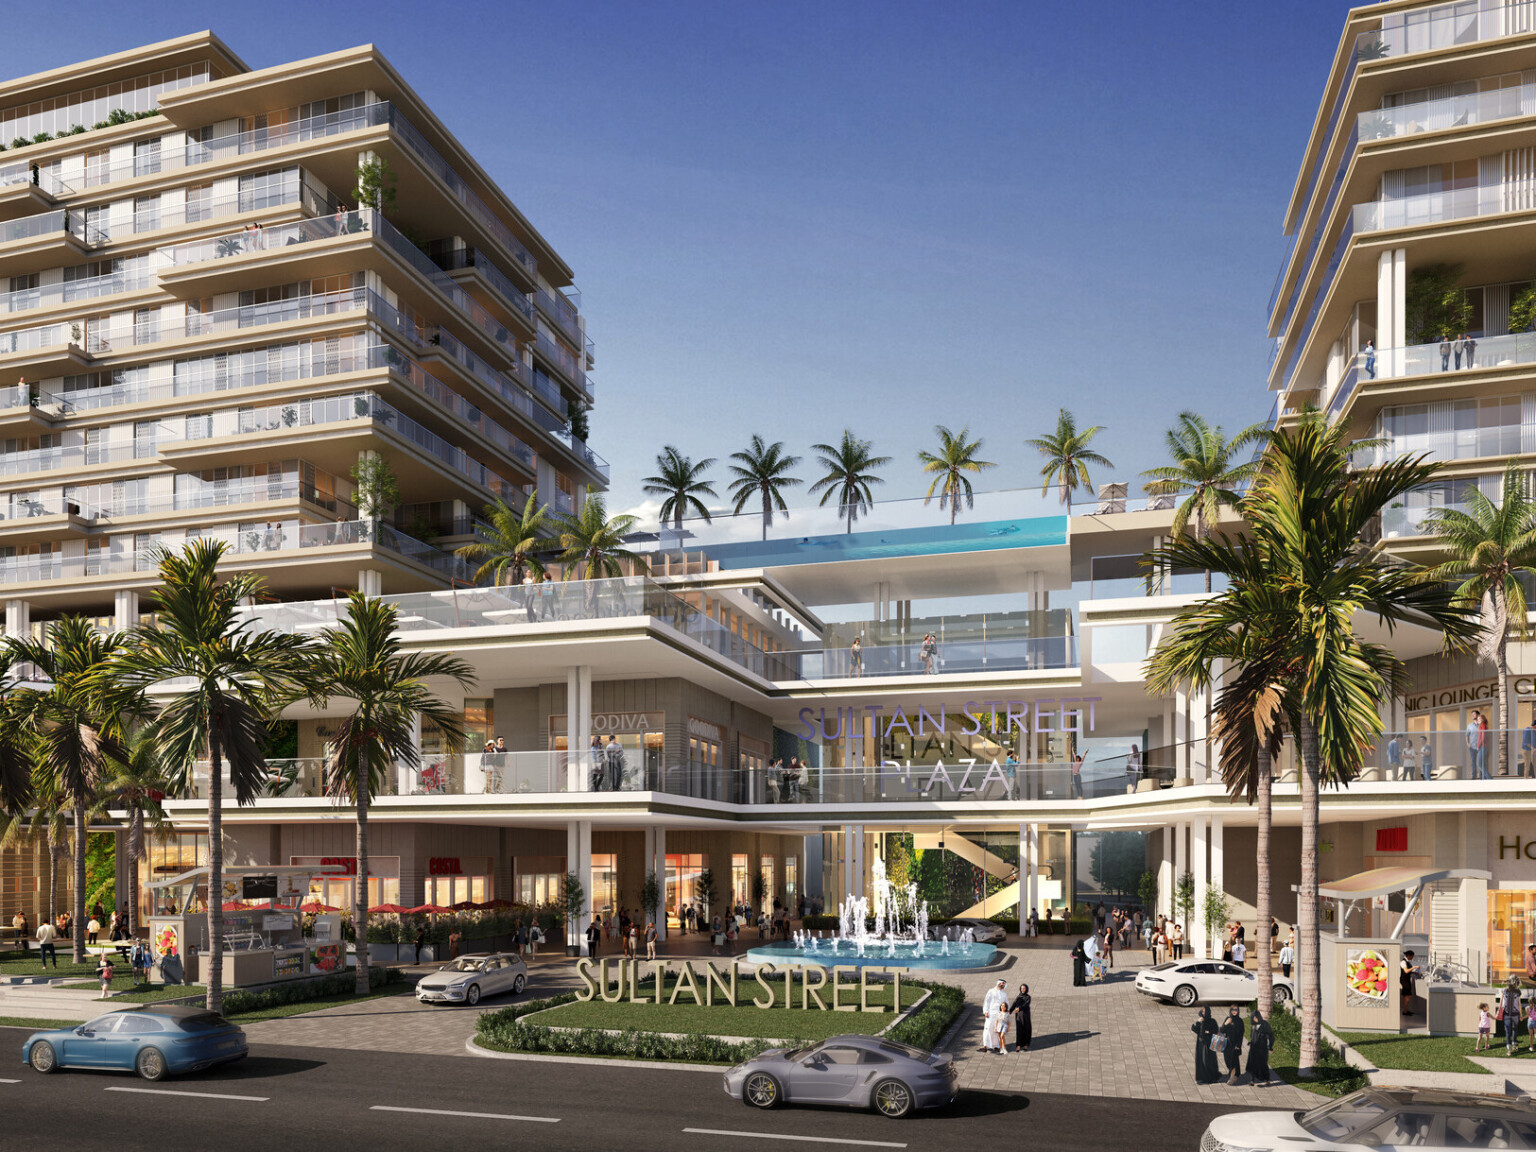 Rendering of multistory apartment building with a glass skywalk lined with palm trees